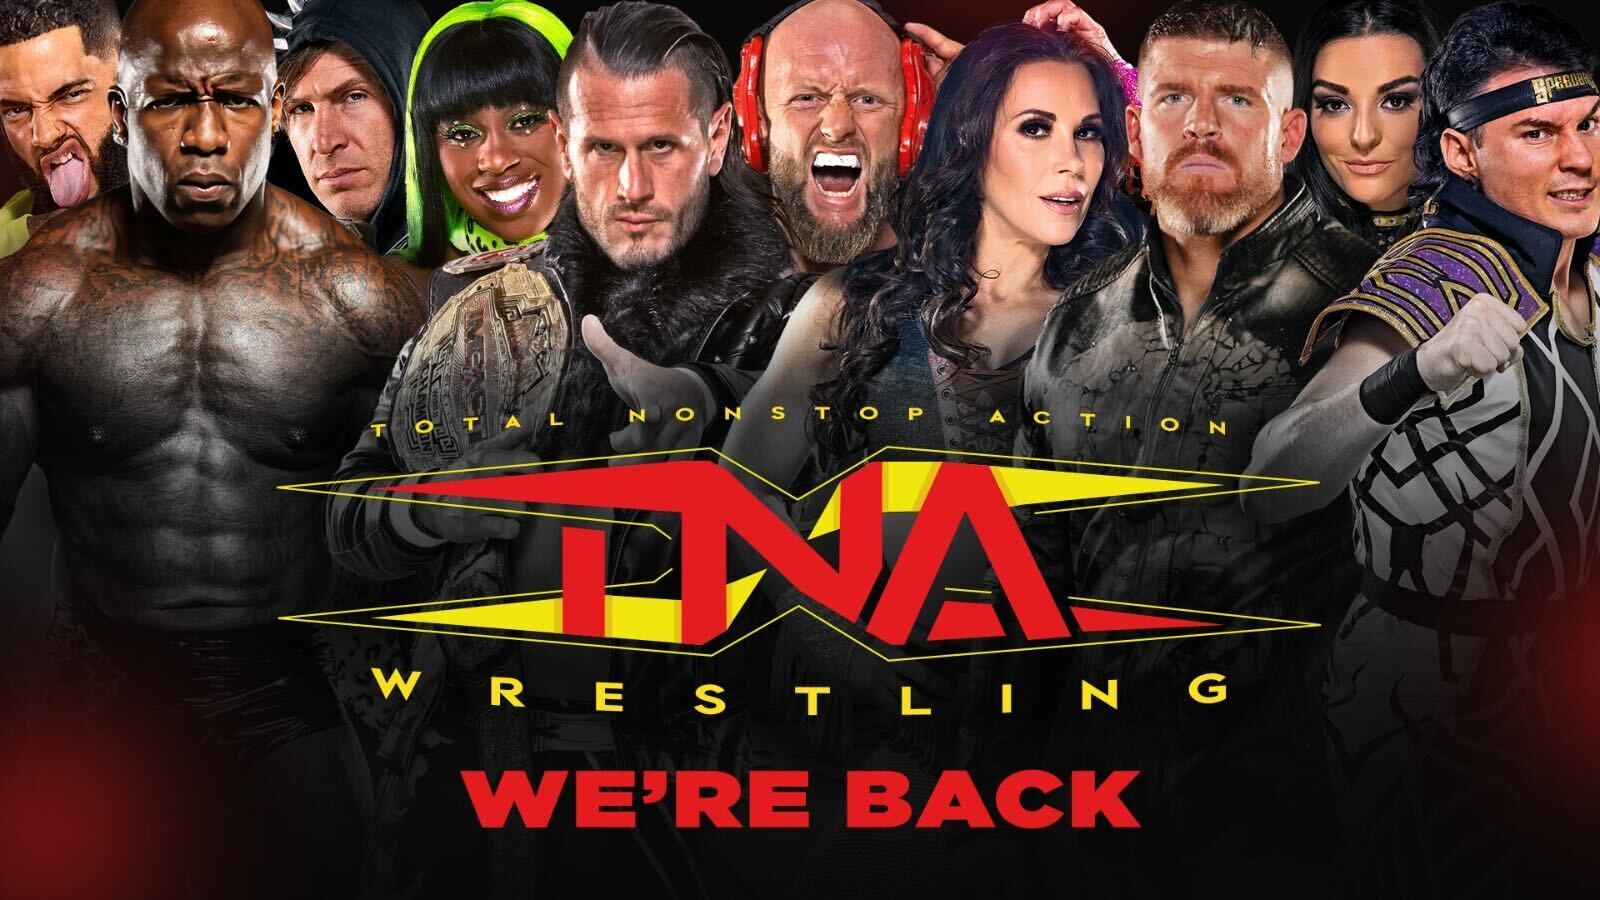 Behind-the-Scenes Updates from TNA – Organizers Delighted with Audience Turnout, Positive Onsite Atmosphere, and More